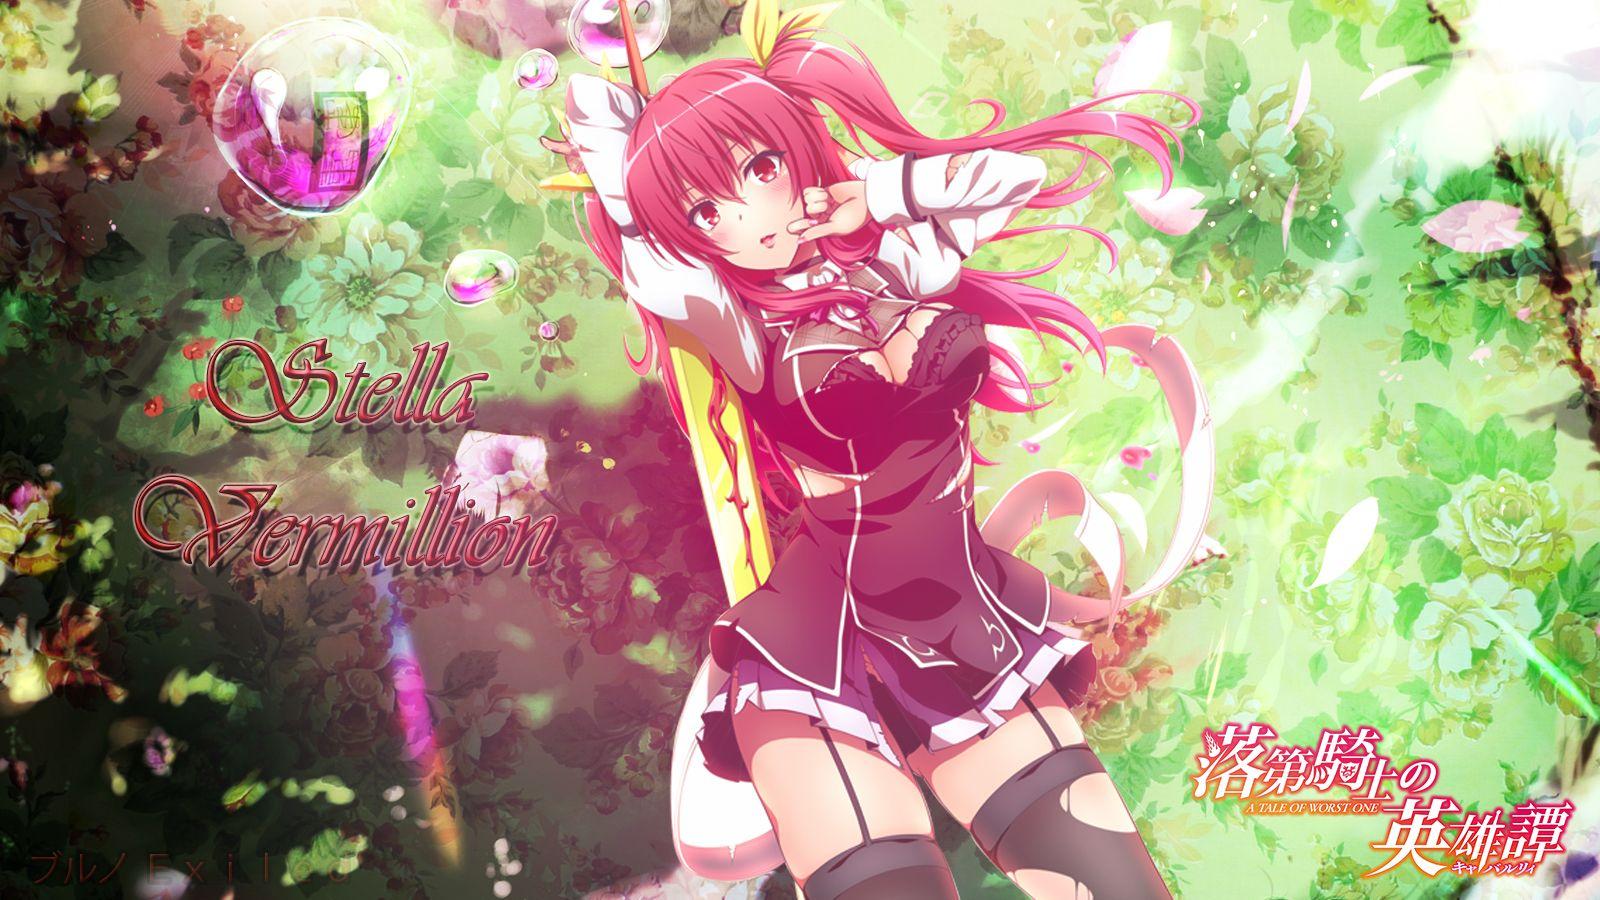 Stella Vermillion wallpaper pixiv by Exiled id 16514532. Anime